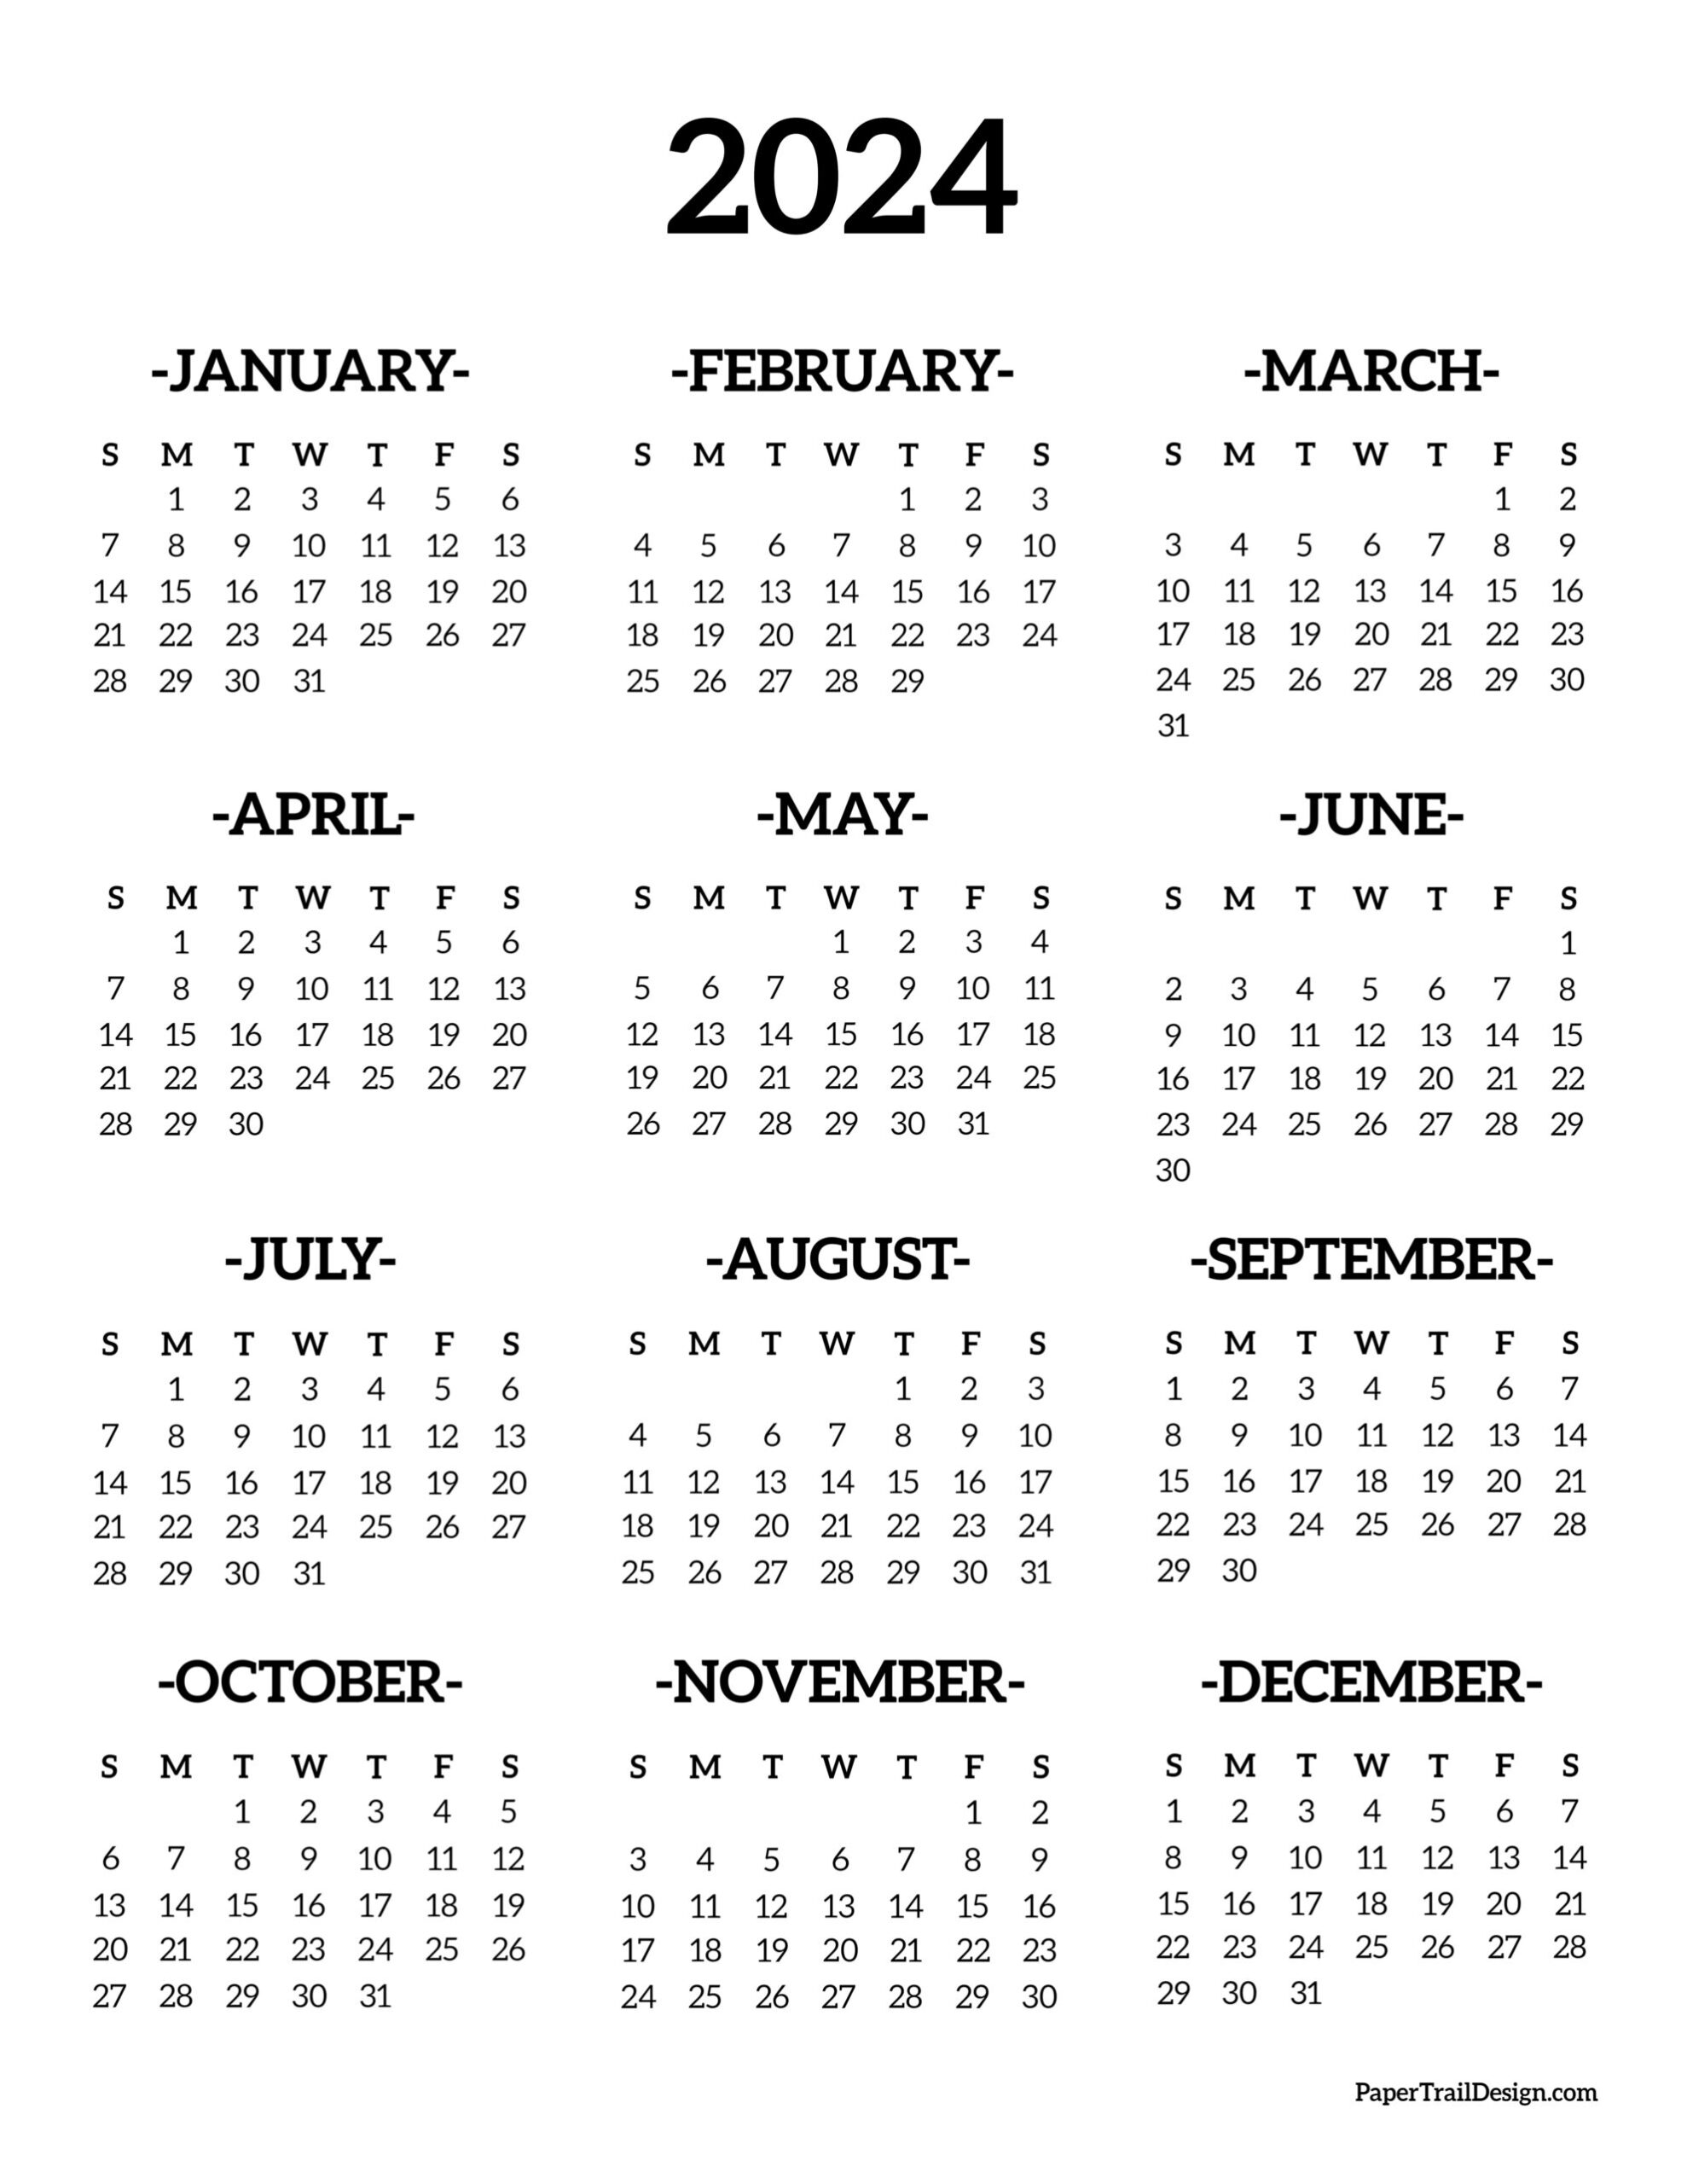 Calendar 2024 Printable One Page - Paper Trail Design for Year 2024 Calendar Printable